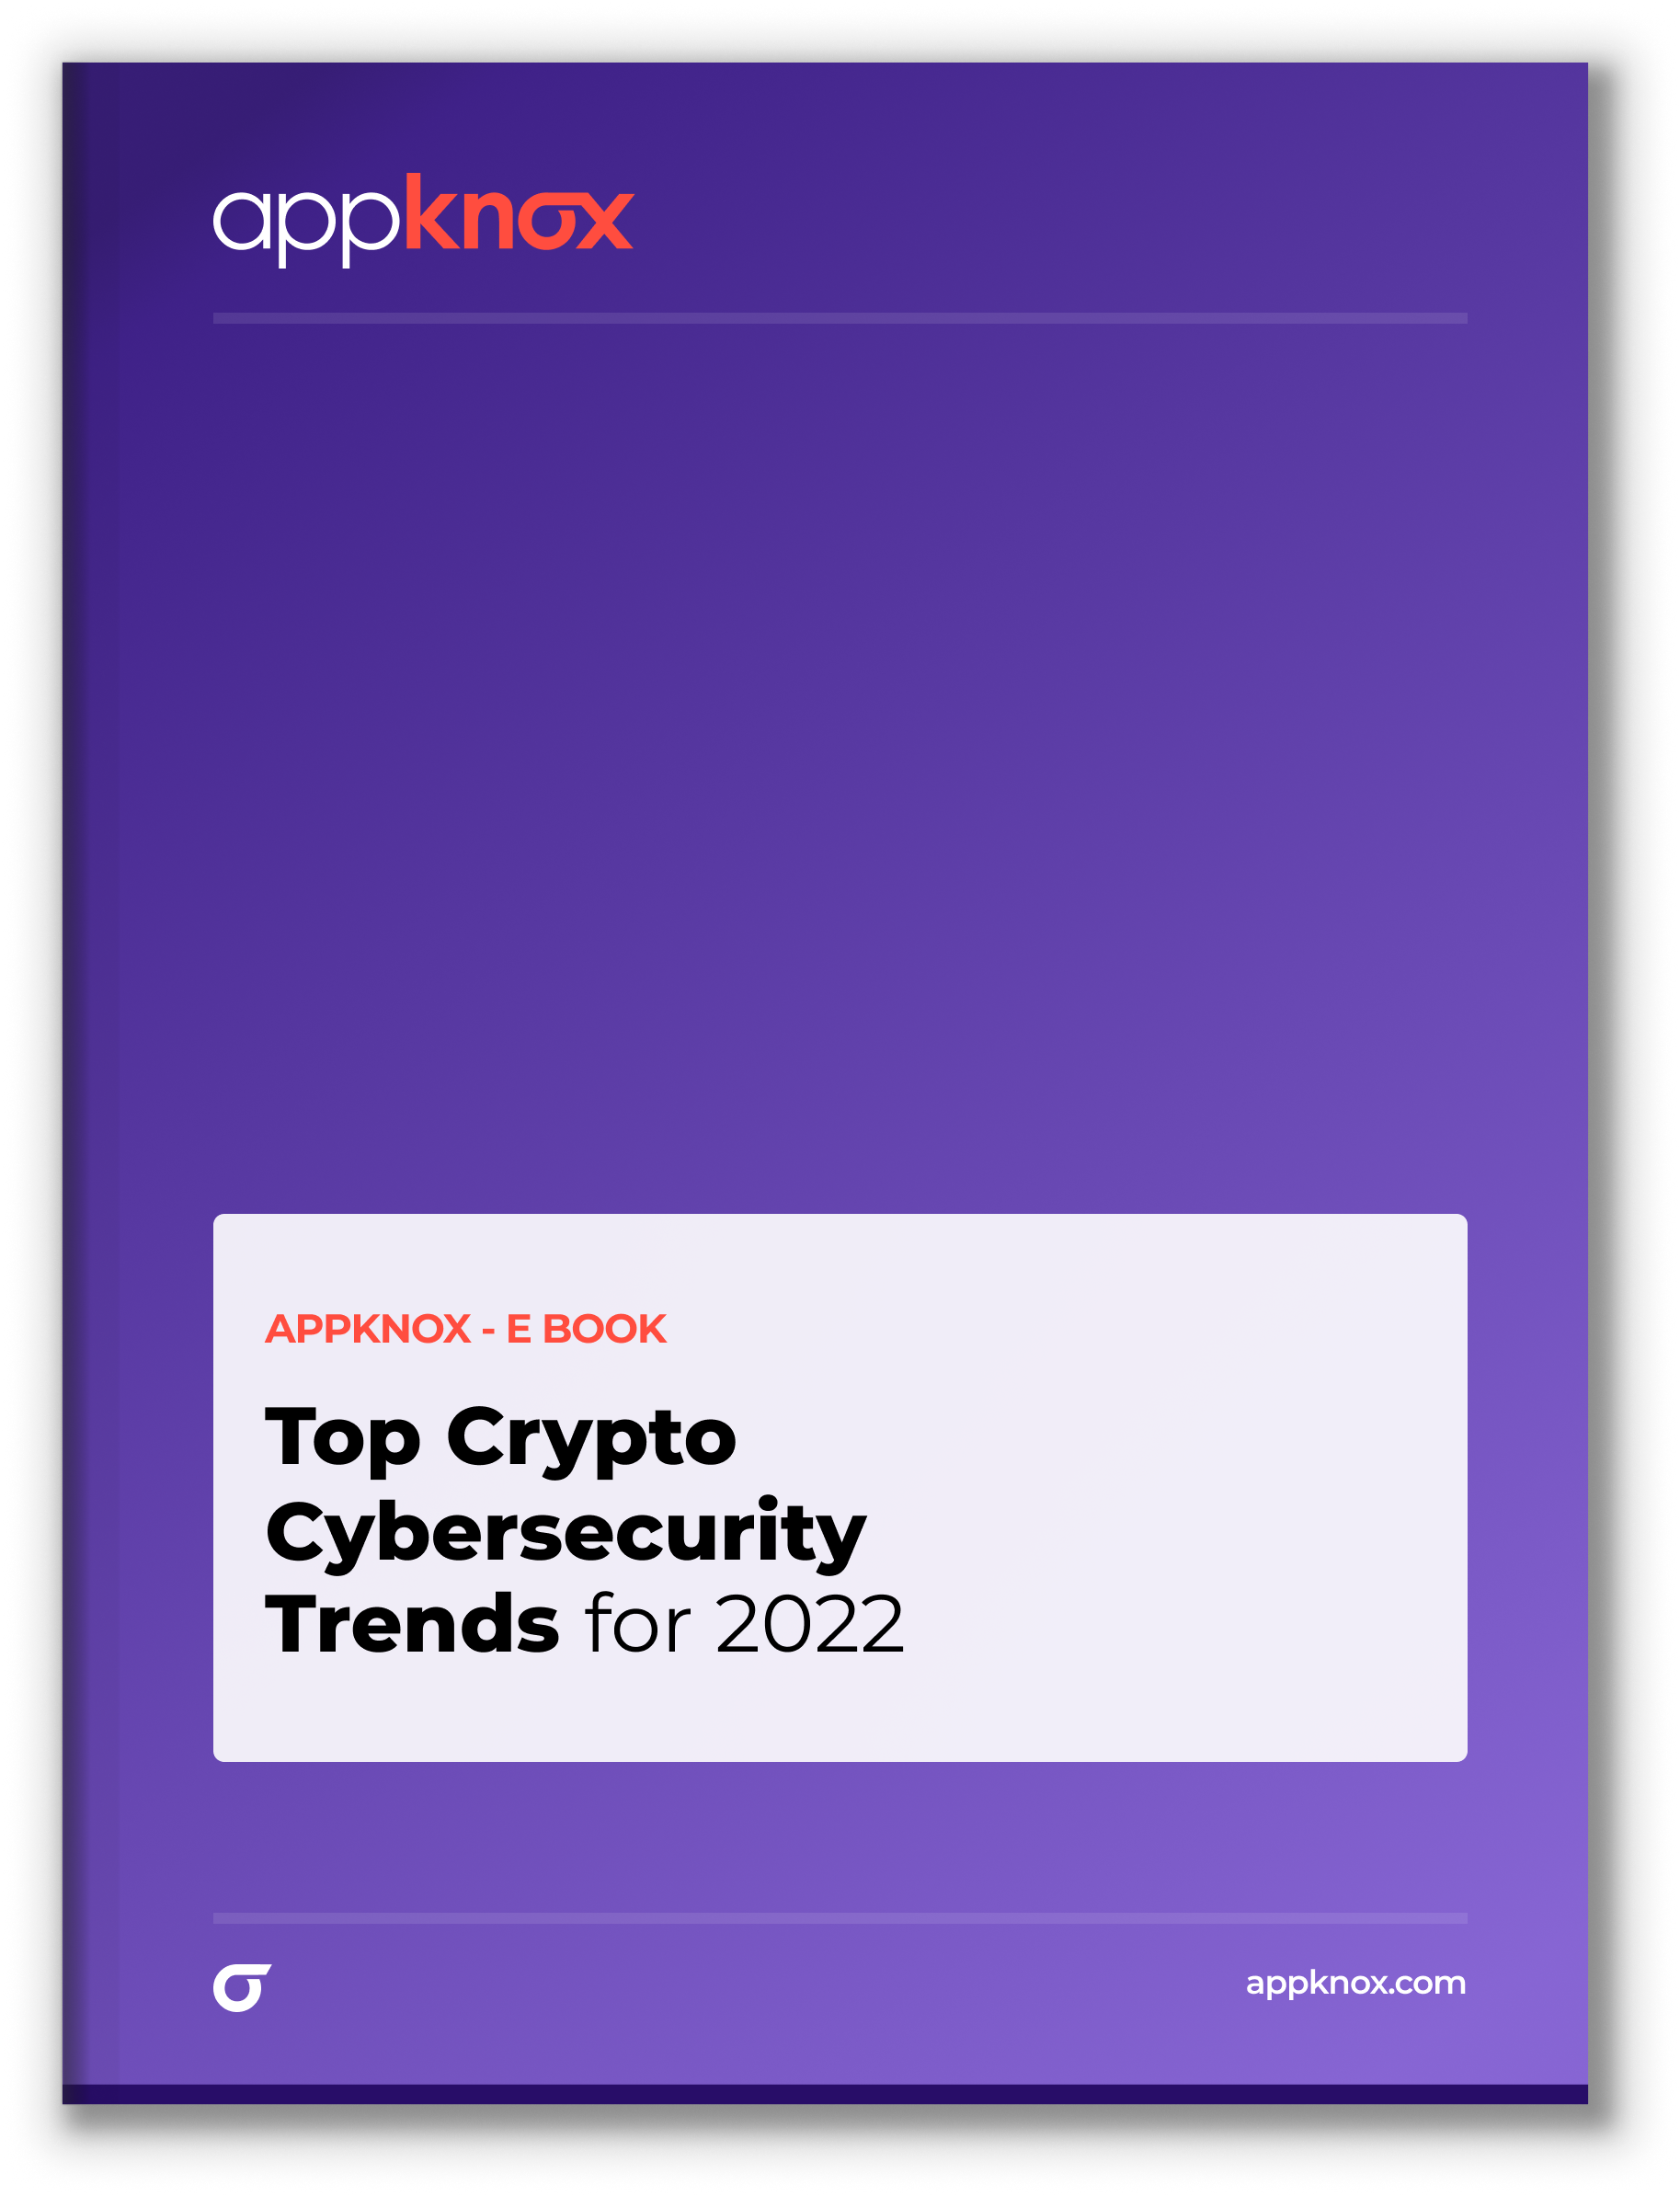 Top Crypto Cybersecurity Trends for 2022